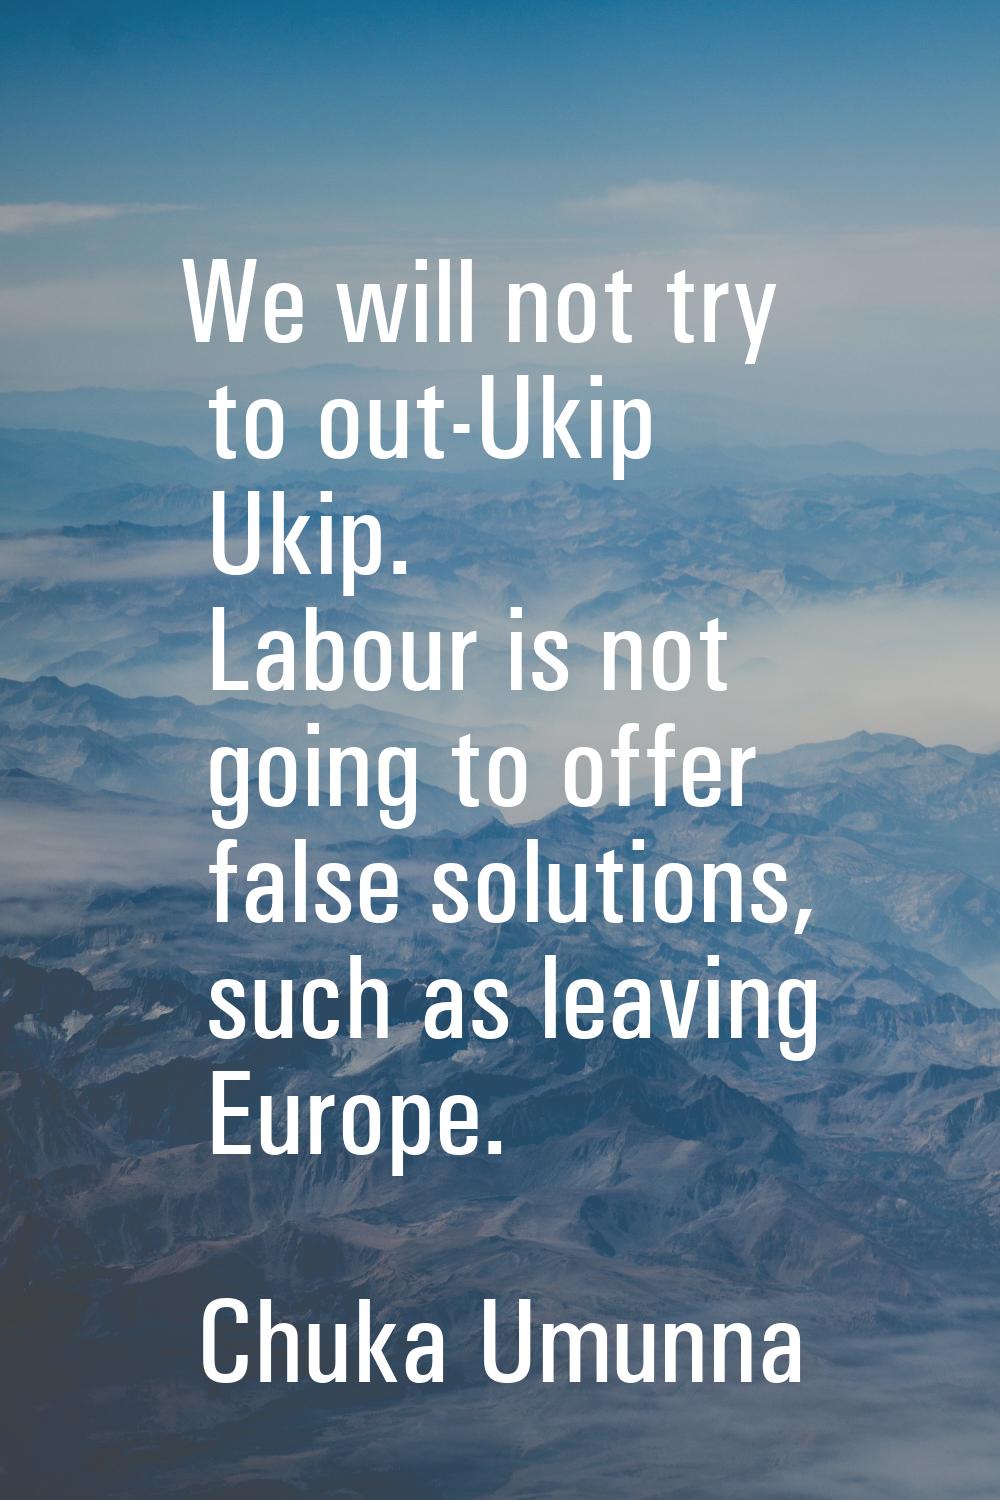 We will not try to out-Ukip Ukip. Labour is not going to offer false solutions, such as leaving Eur